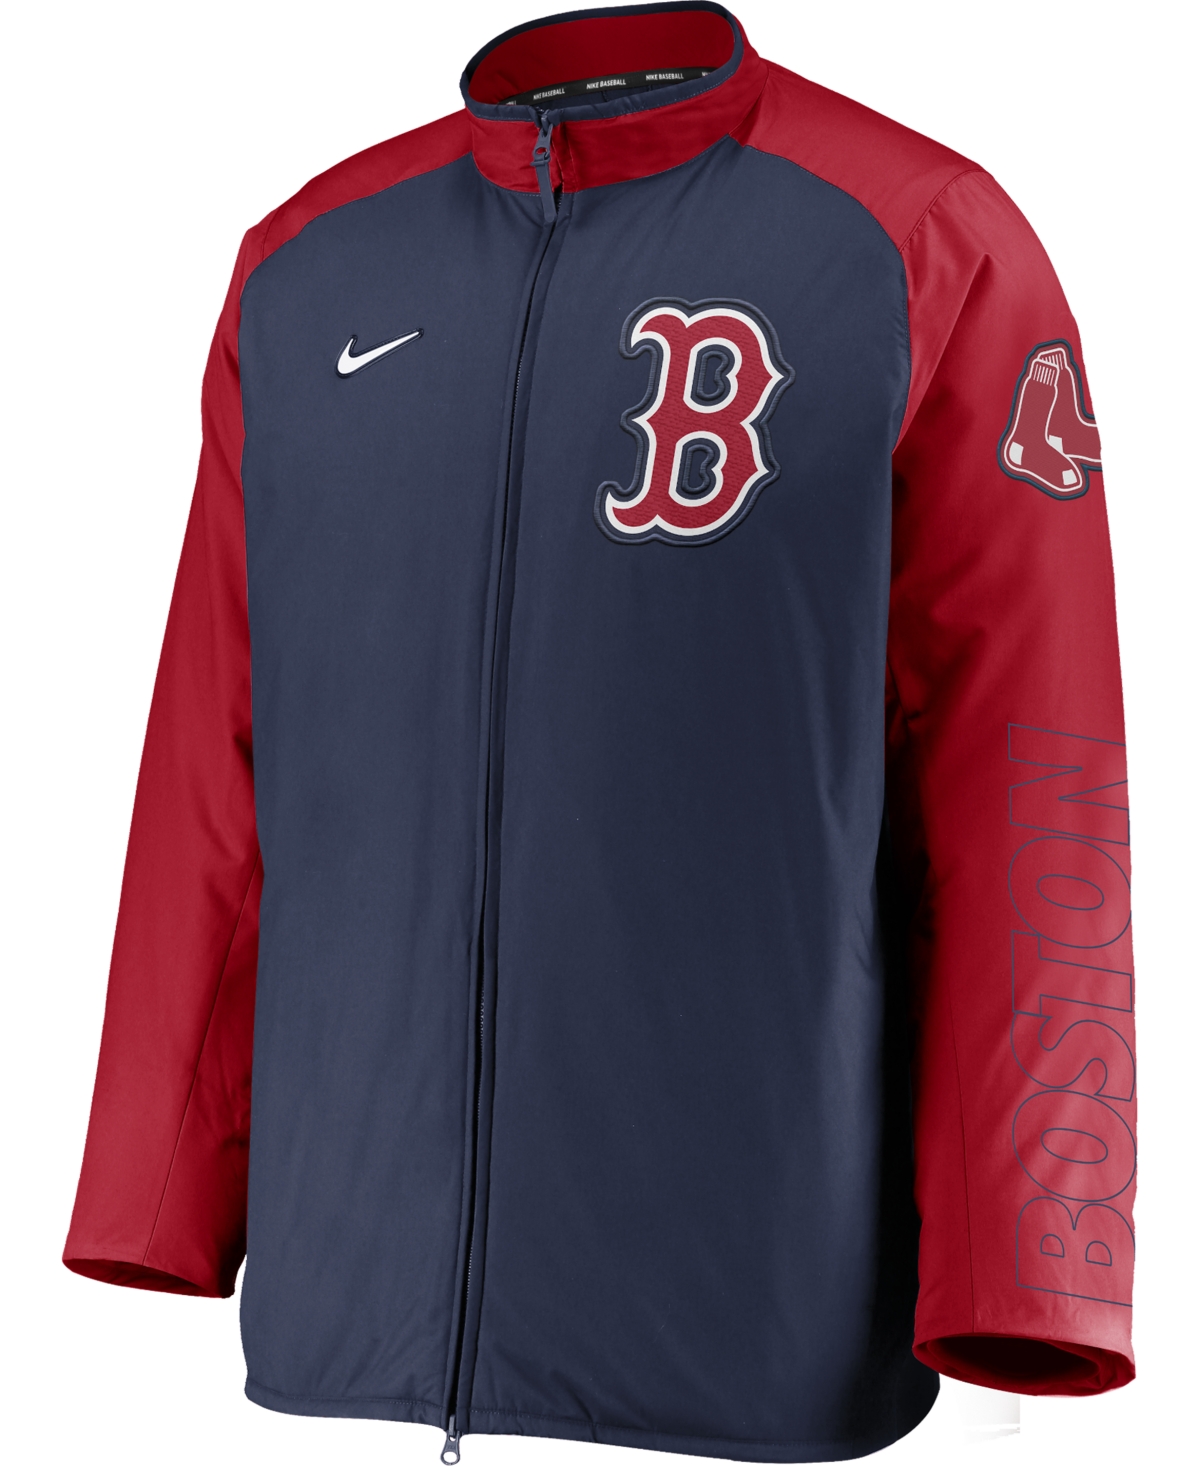 Nike Men's Boston Red Sox Authentic Collection Dugout Jacket